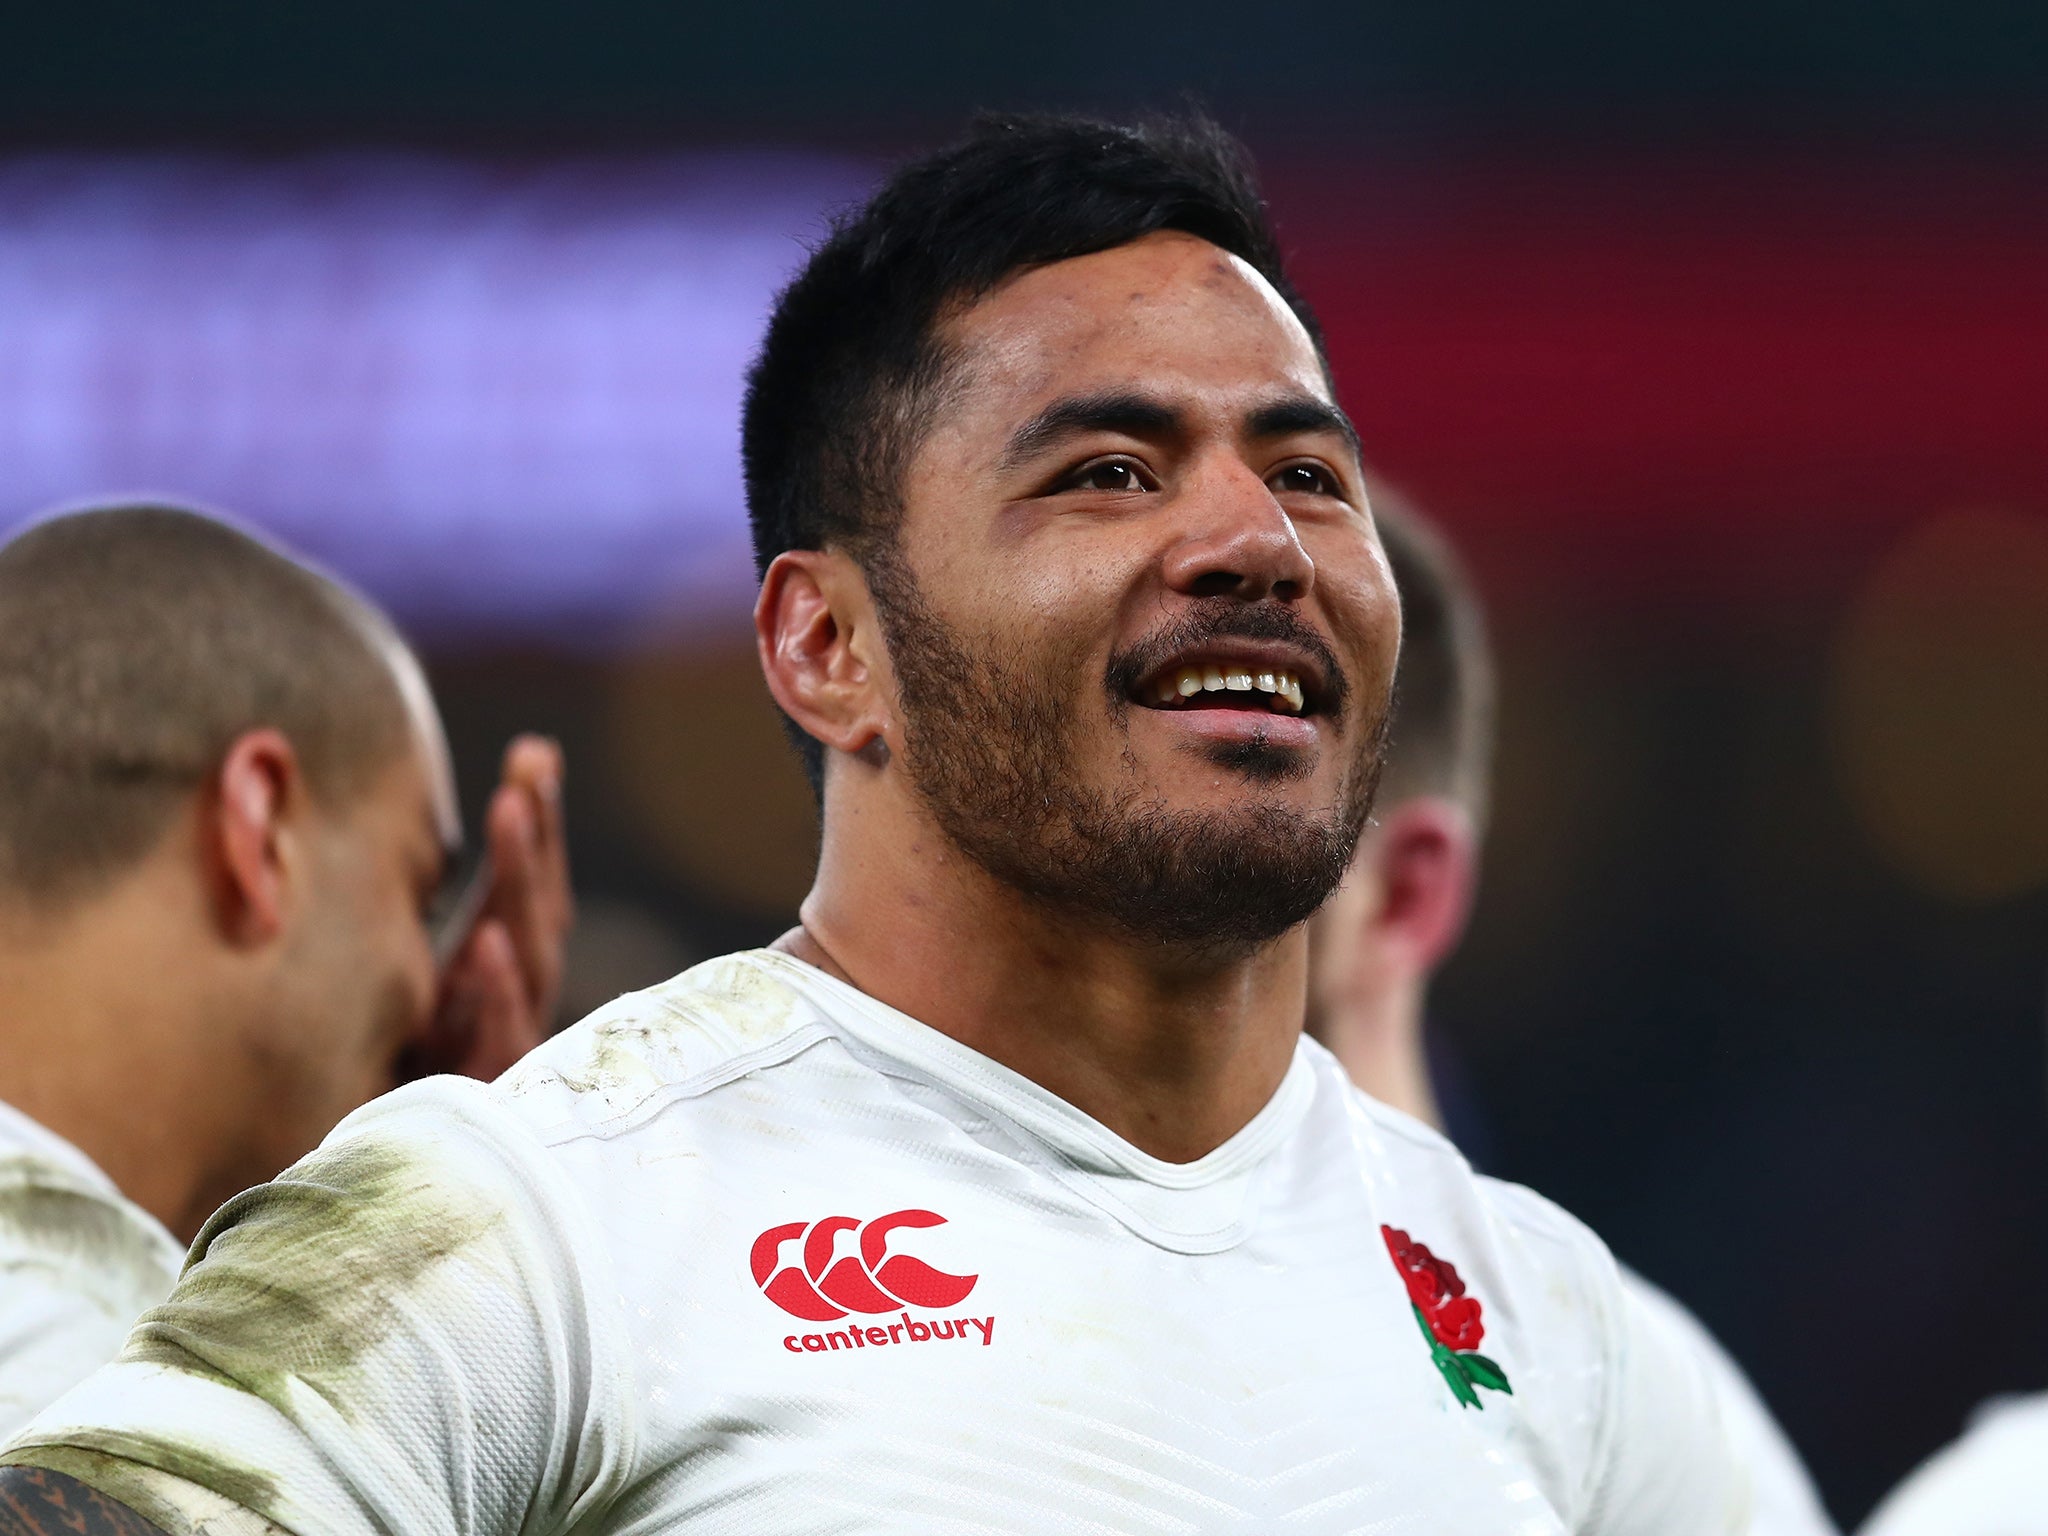 Tuilagi is expected to be out for around six weeks